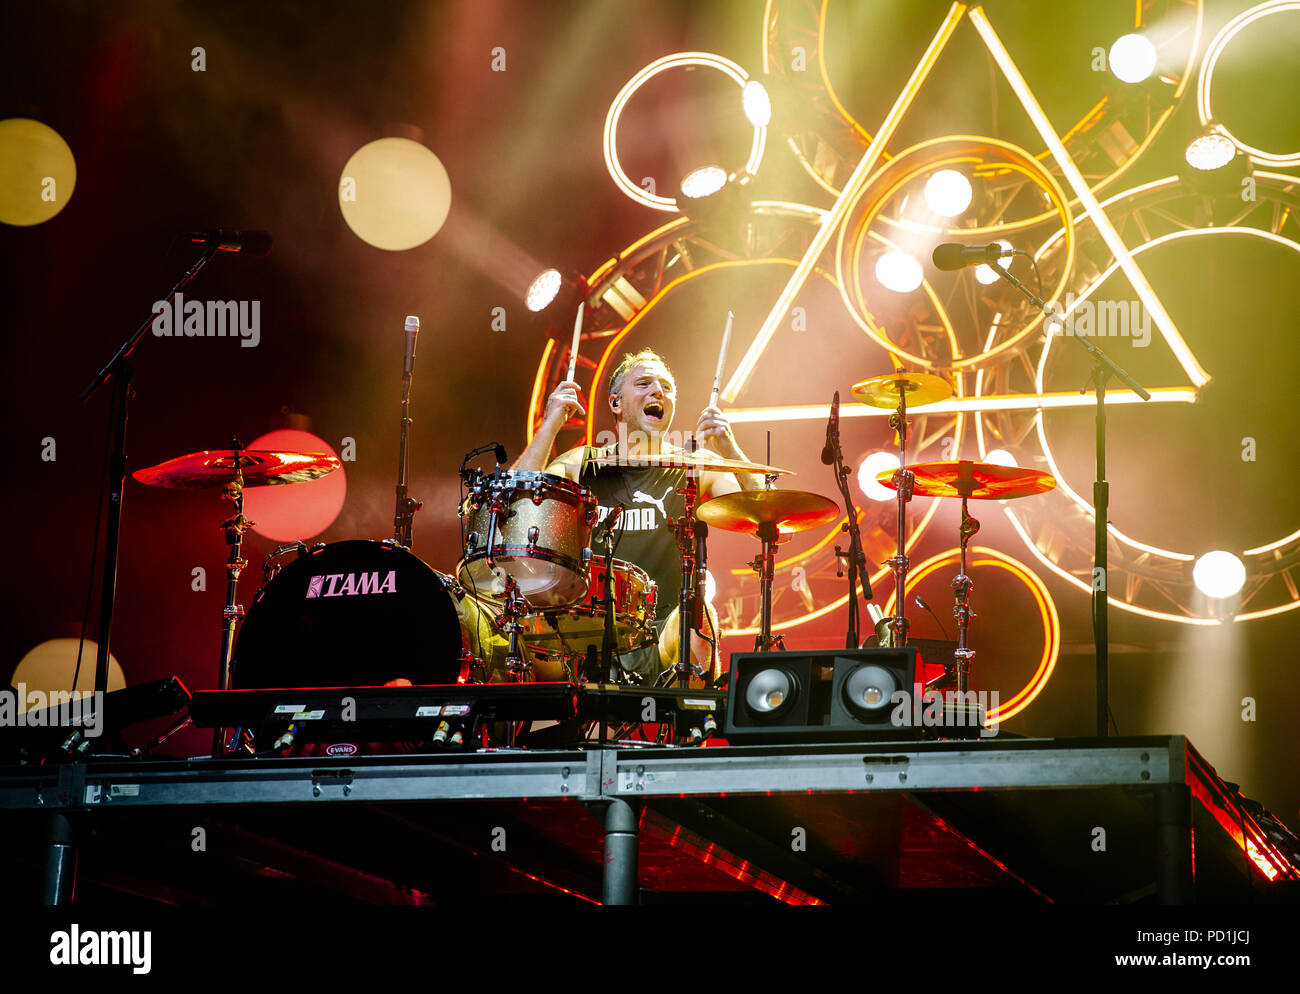 Austin, Texas, USA. 3rd Aug, 2018. JOSH EPPARD, drummer for Coheed and Cambria, performs at the Austin360 Amphitheater in Austin, Texas. Credit: Alicia Armijo/ZUMA Wire/Alamy Live News Stock Photo